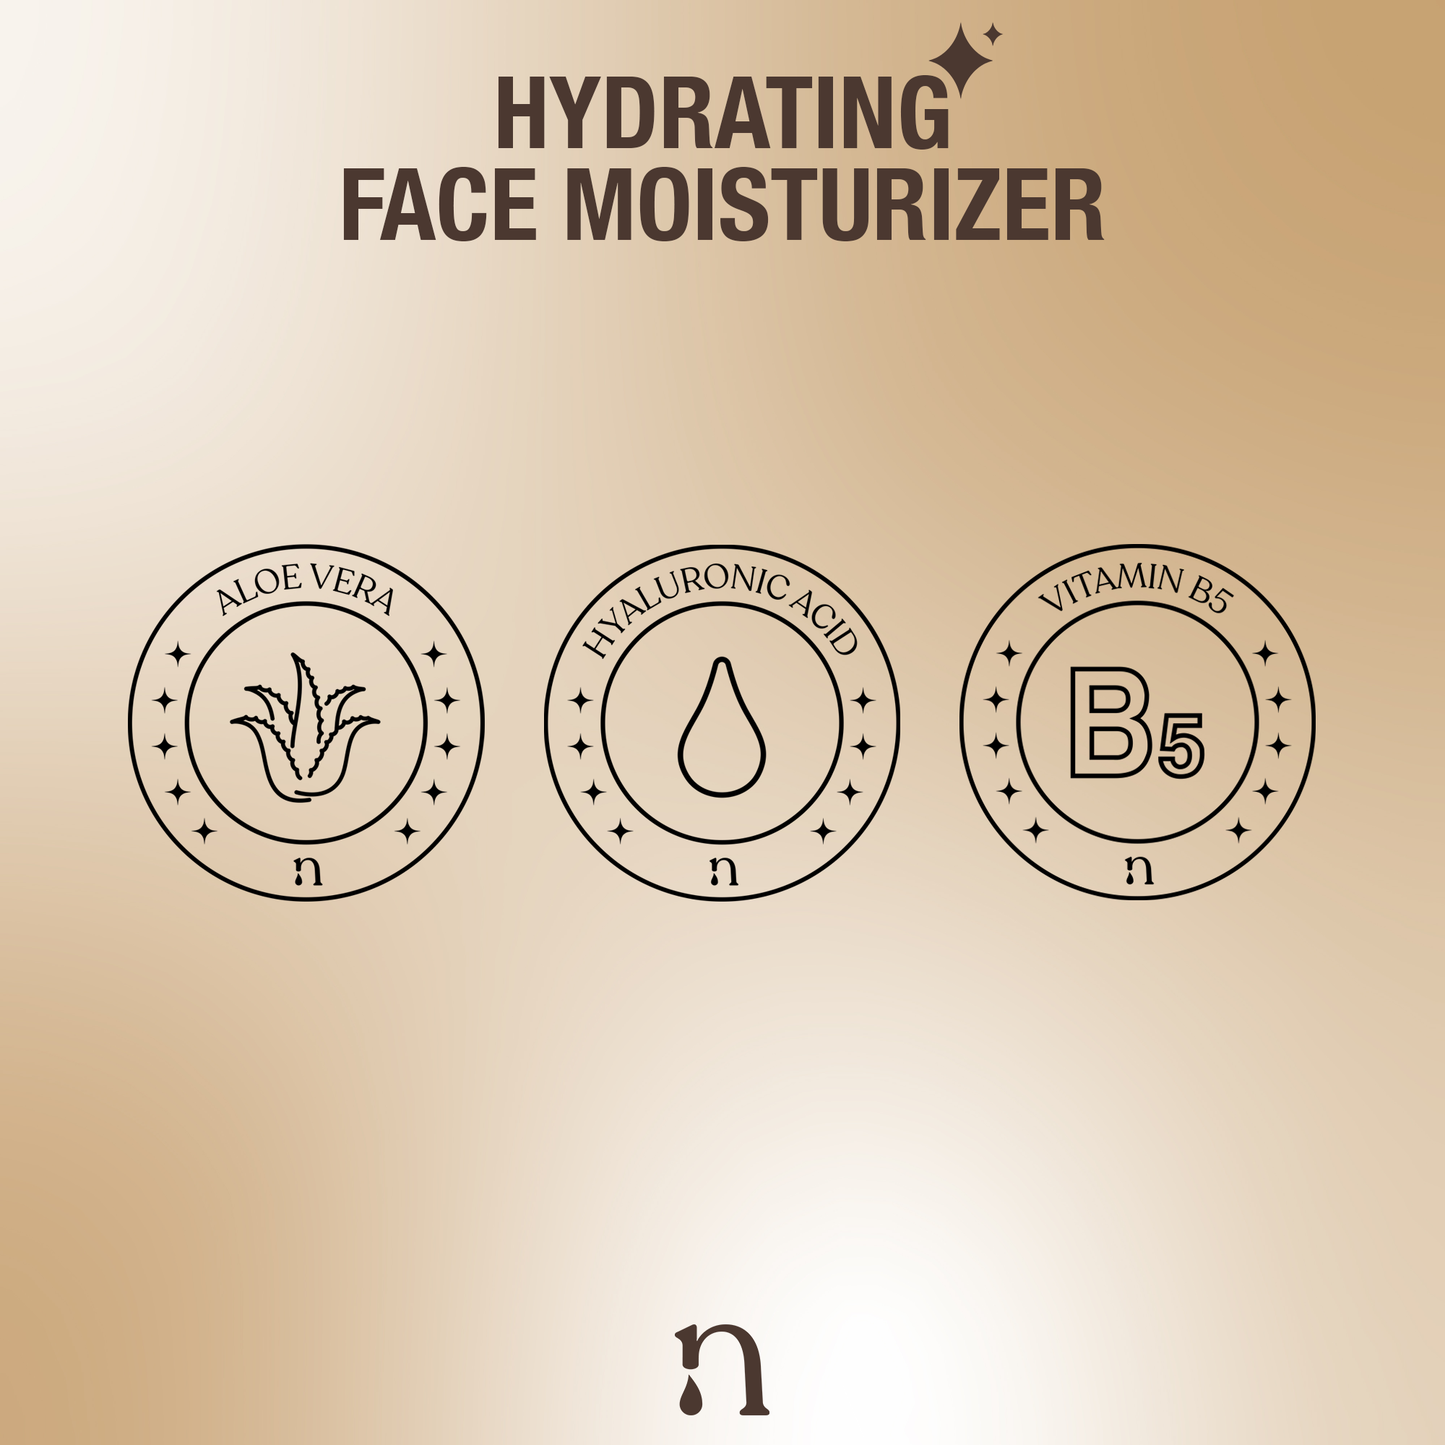 Graphic representation of key ingredients for a hydrating face moisturizer, depicted with icons on a neutral background. The icons visually communicate the nourishing components that contribute to the moisturizer's efficacy for a clean and minimalist skin